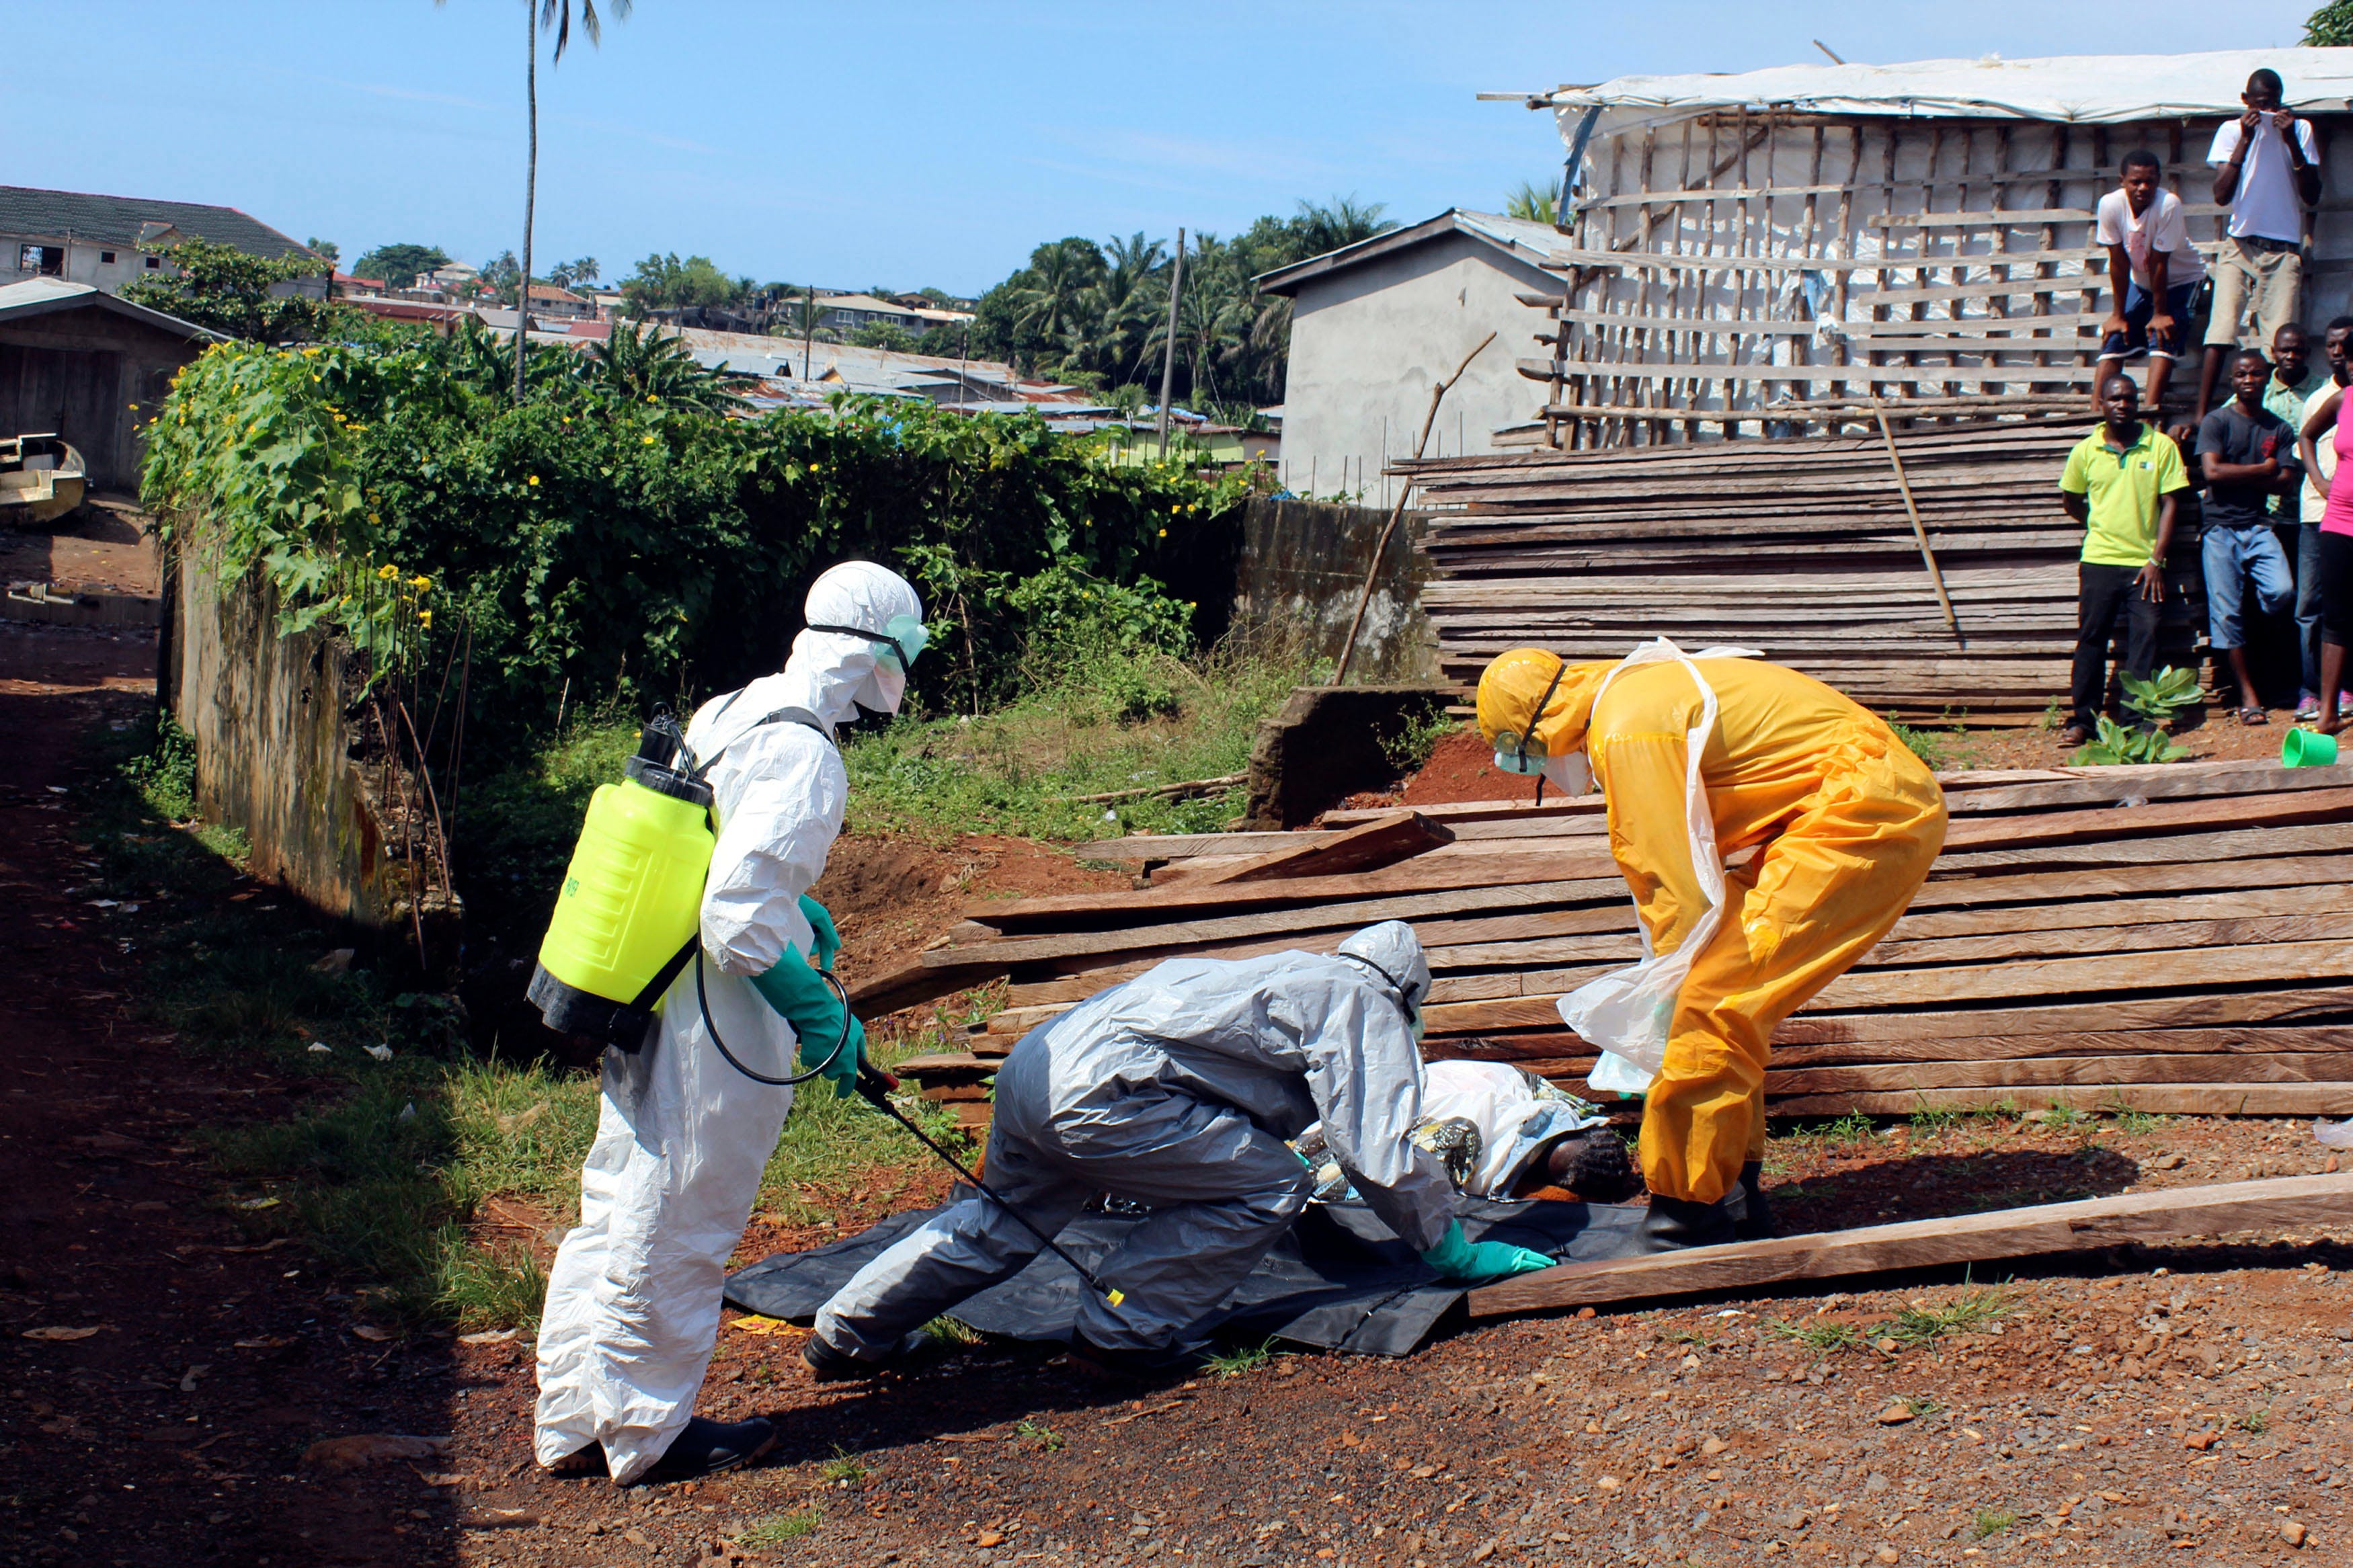 Sierra Leone Ebola Burial Workers Dump Bodies In Pay Protest Fox News 